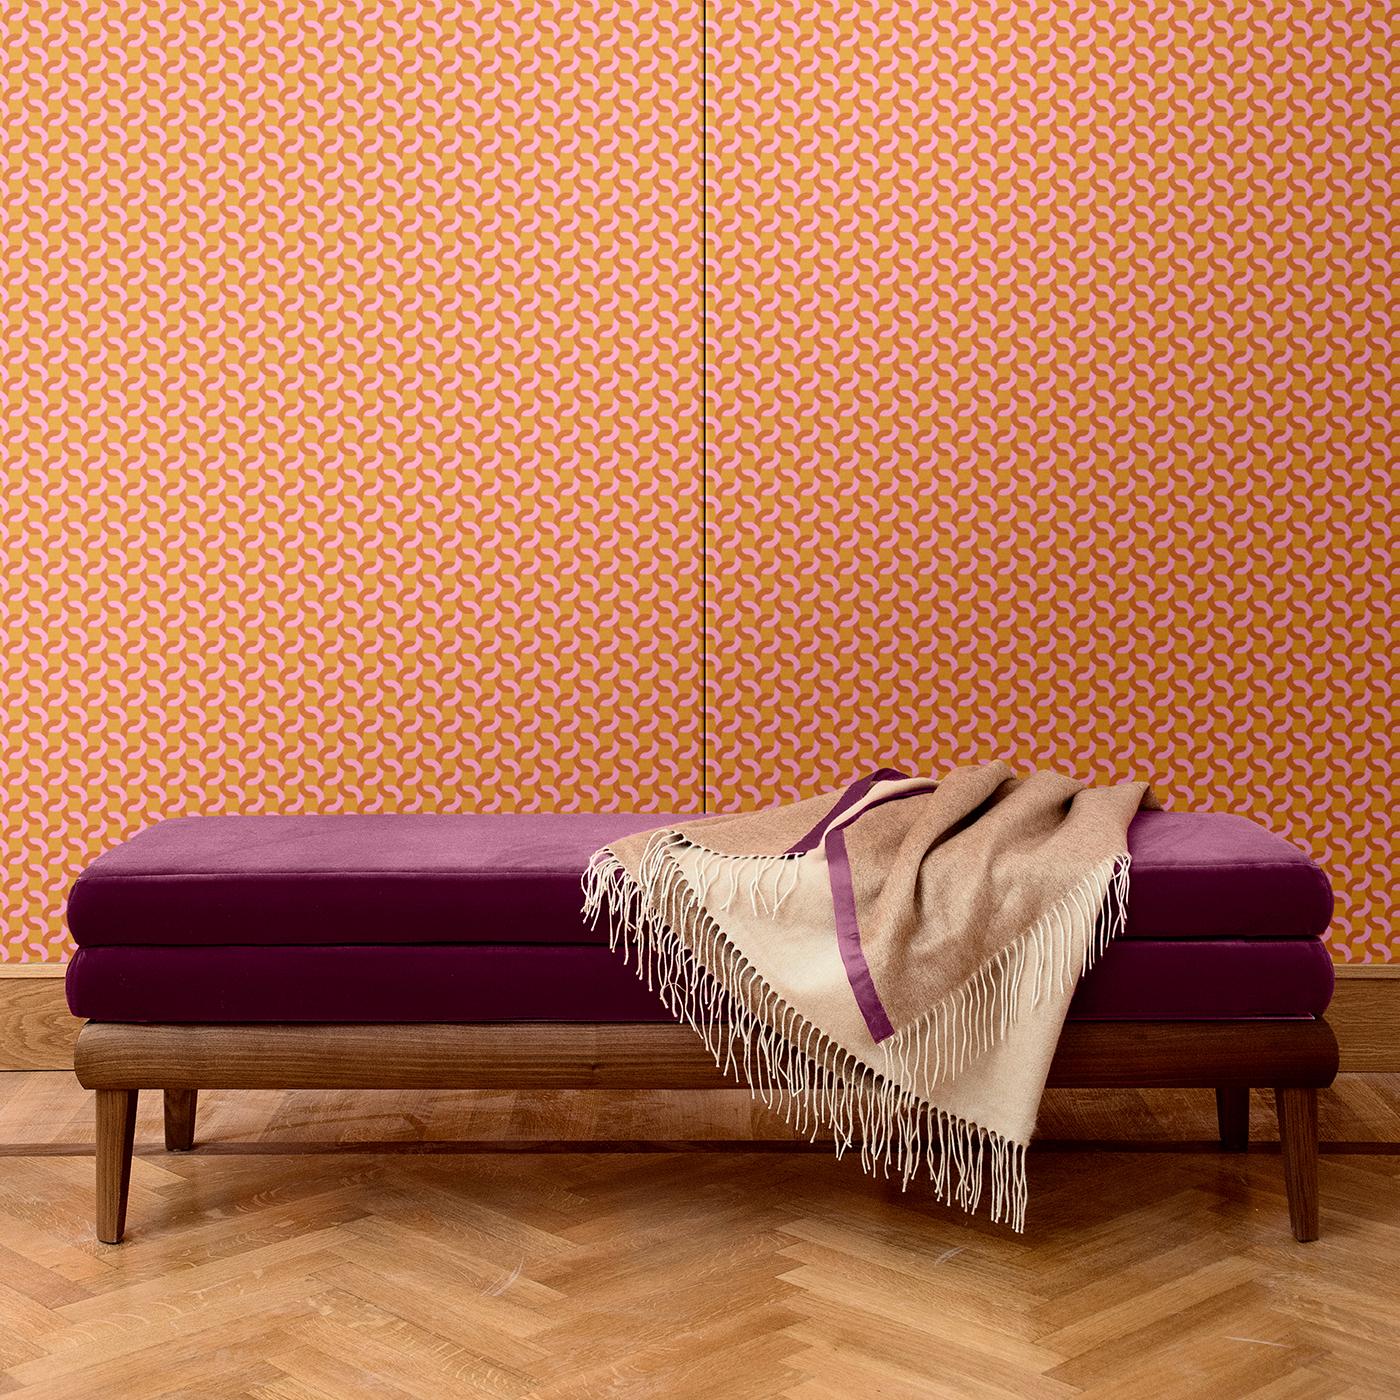 What seems a uniform golden color is the result of an elegant abstract motif in forest green and two tones of pink. This superb wall decoration is part of the Geometric collection, suitable for any sophisticated interior, where it will add a refined